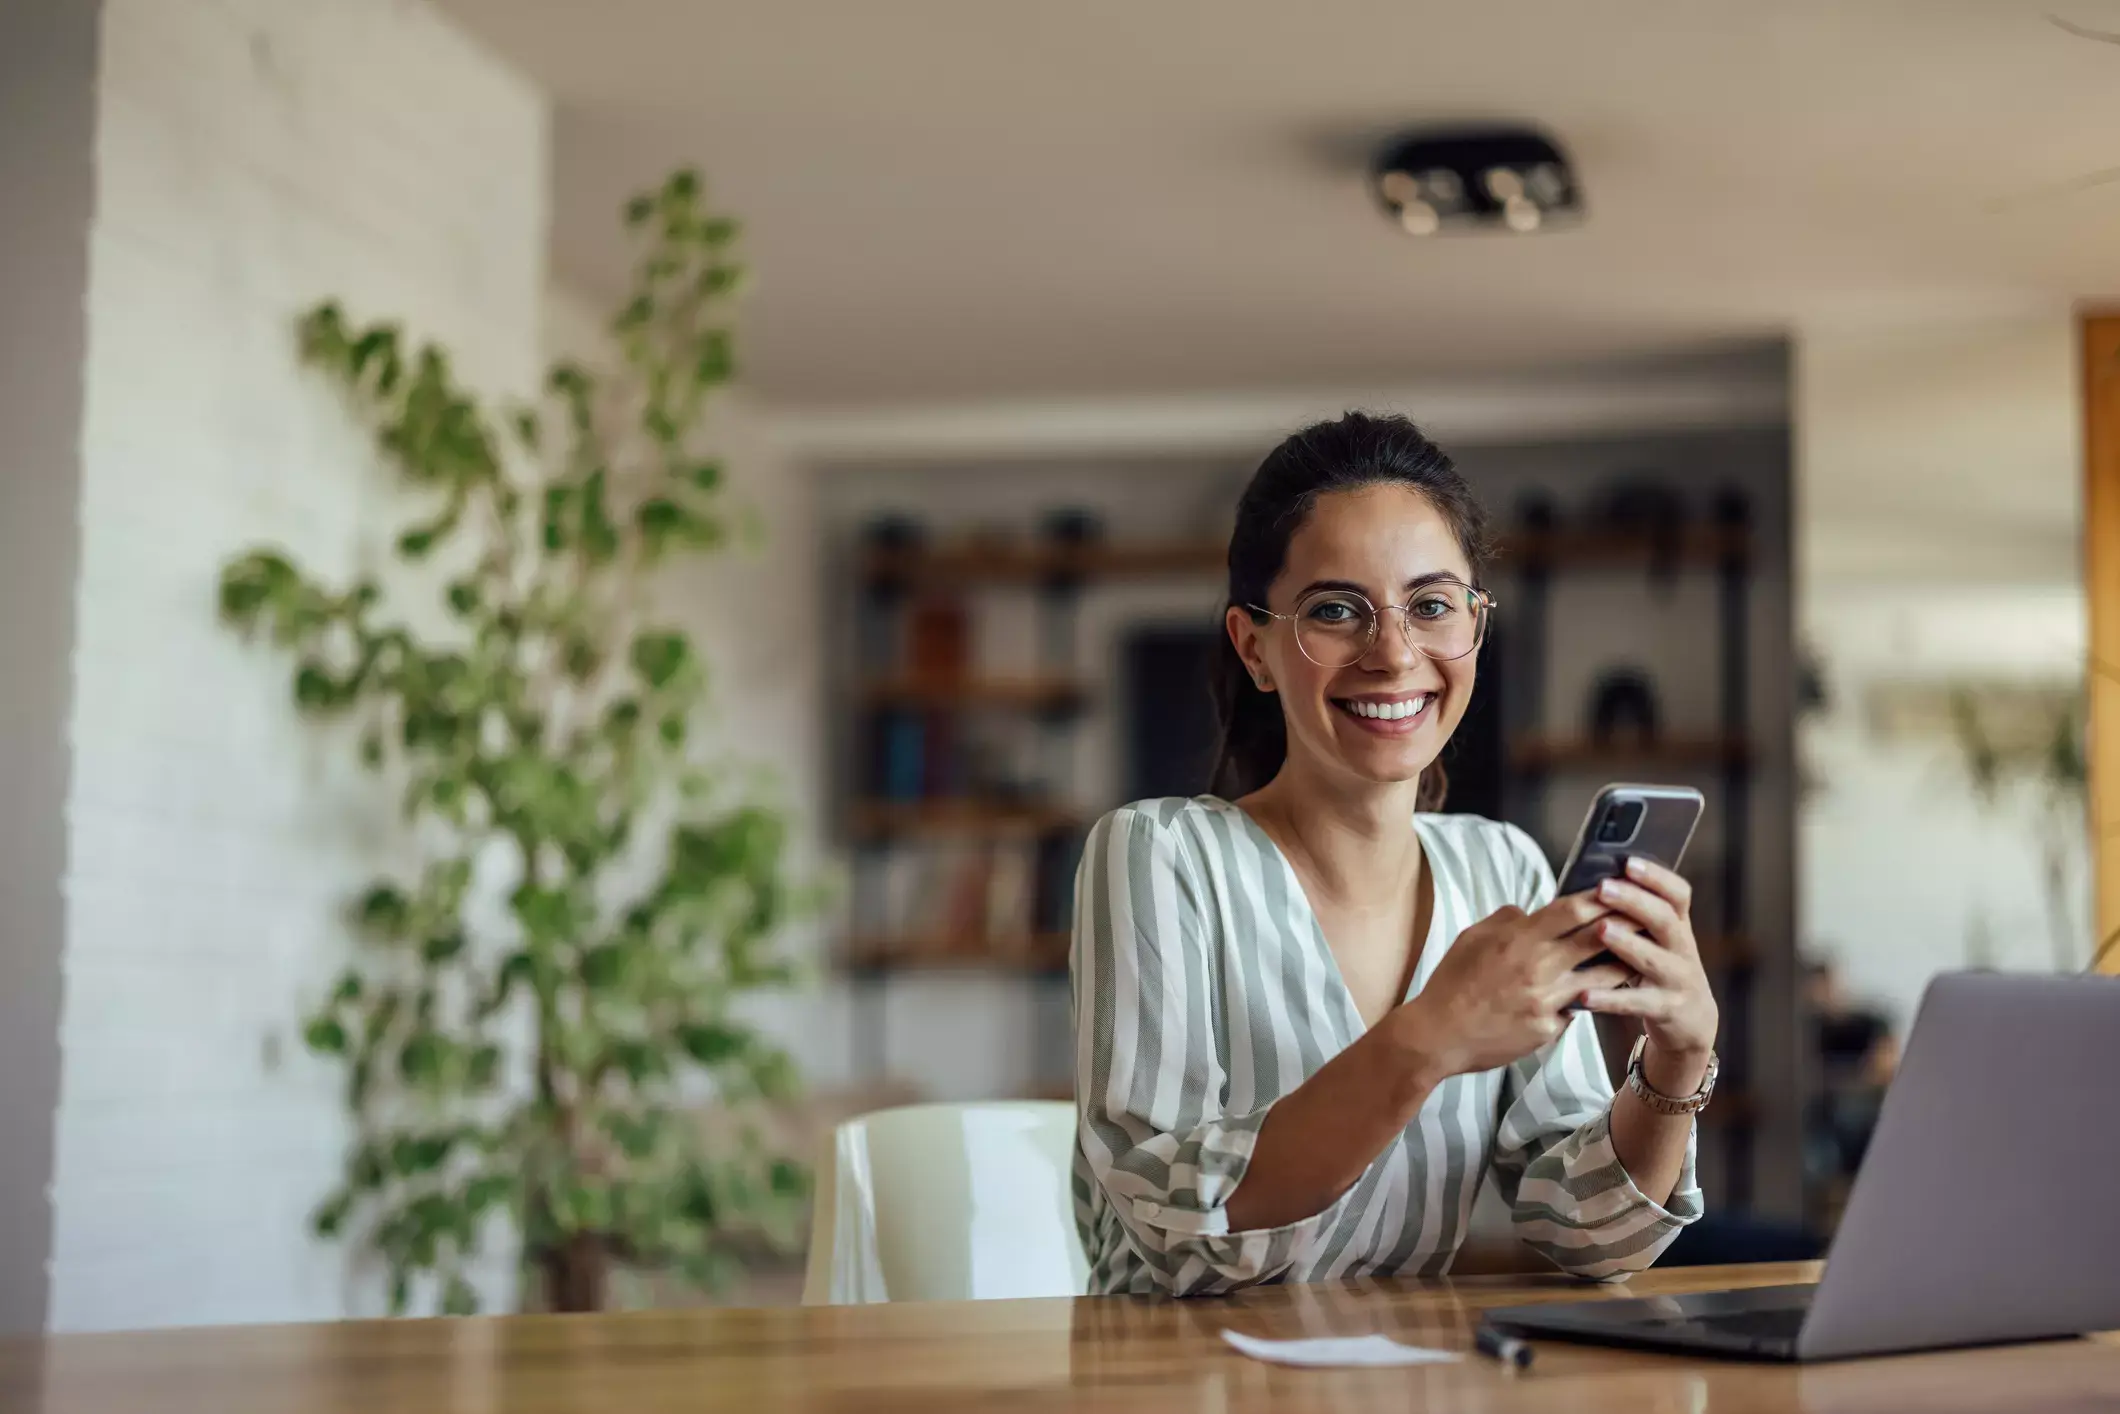 Smiling professional woman in striped blouse using smartphone at home office desk with laptop and plant nearby